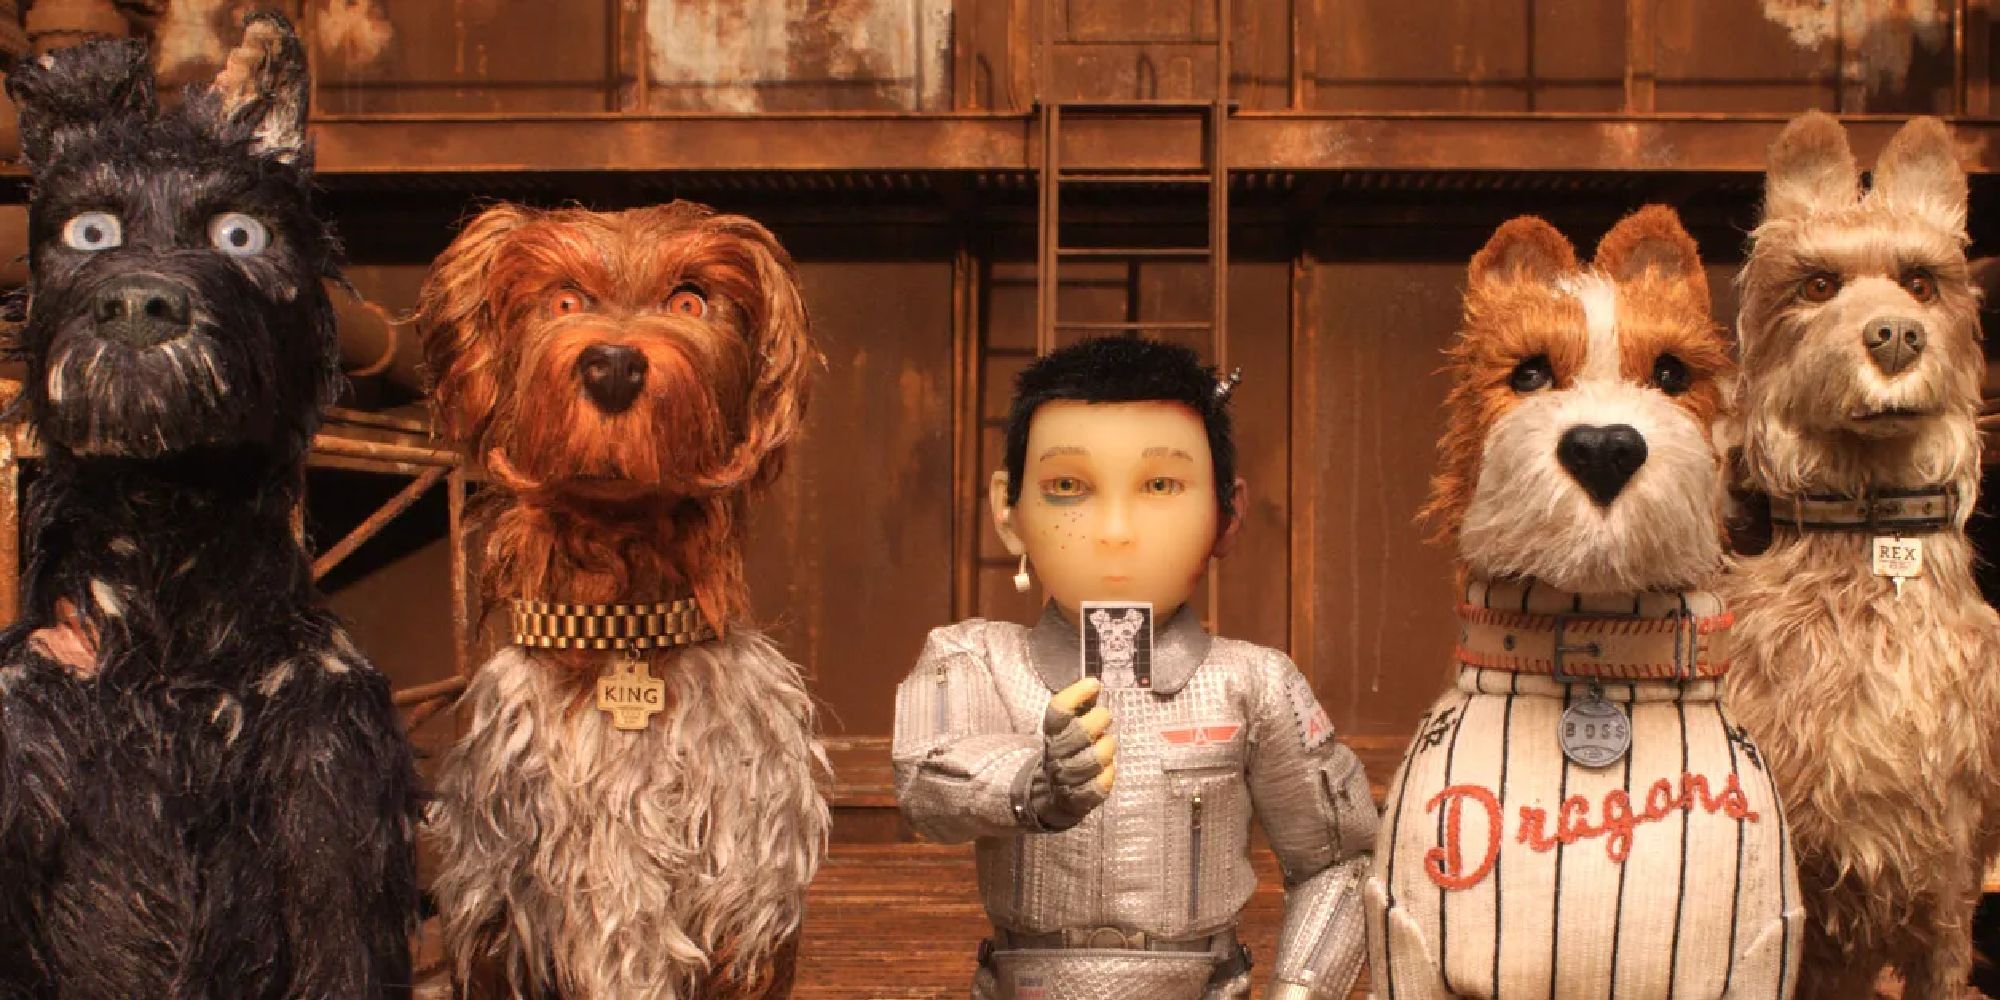 A group of stop-motion animated dogs in Isle of Dogs